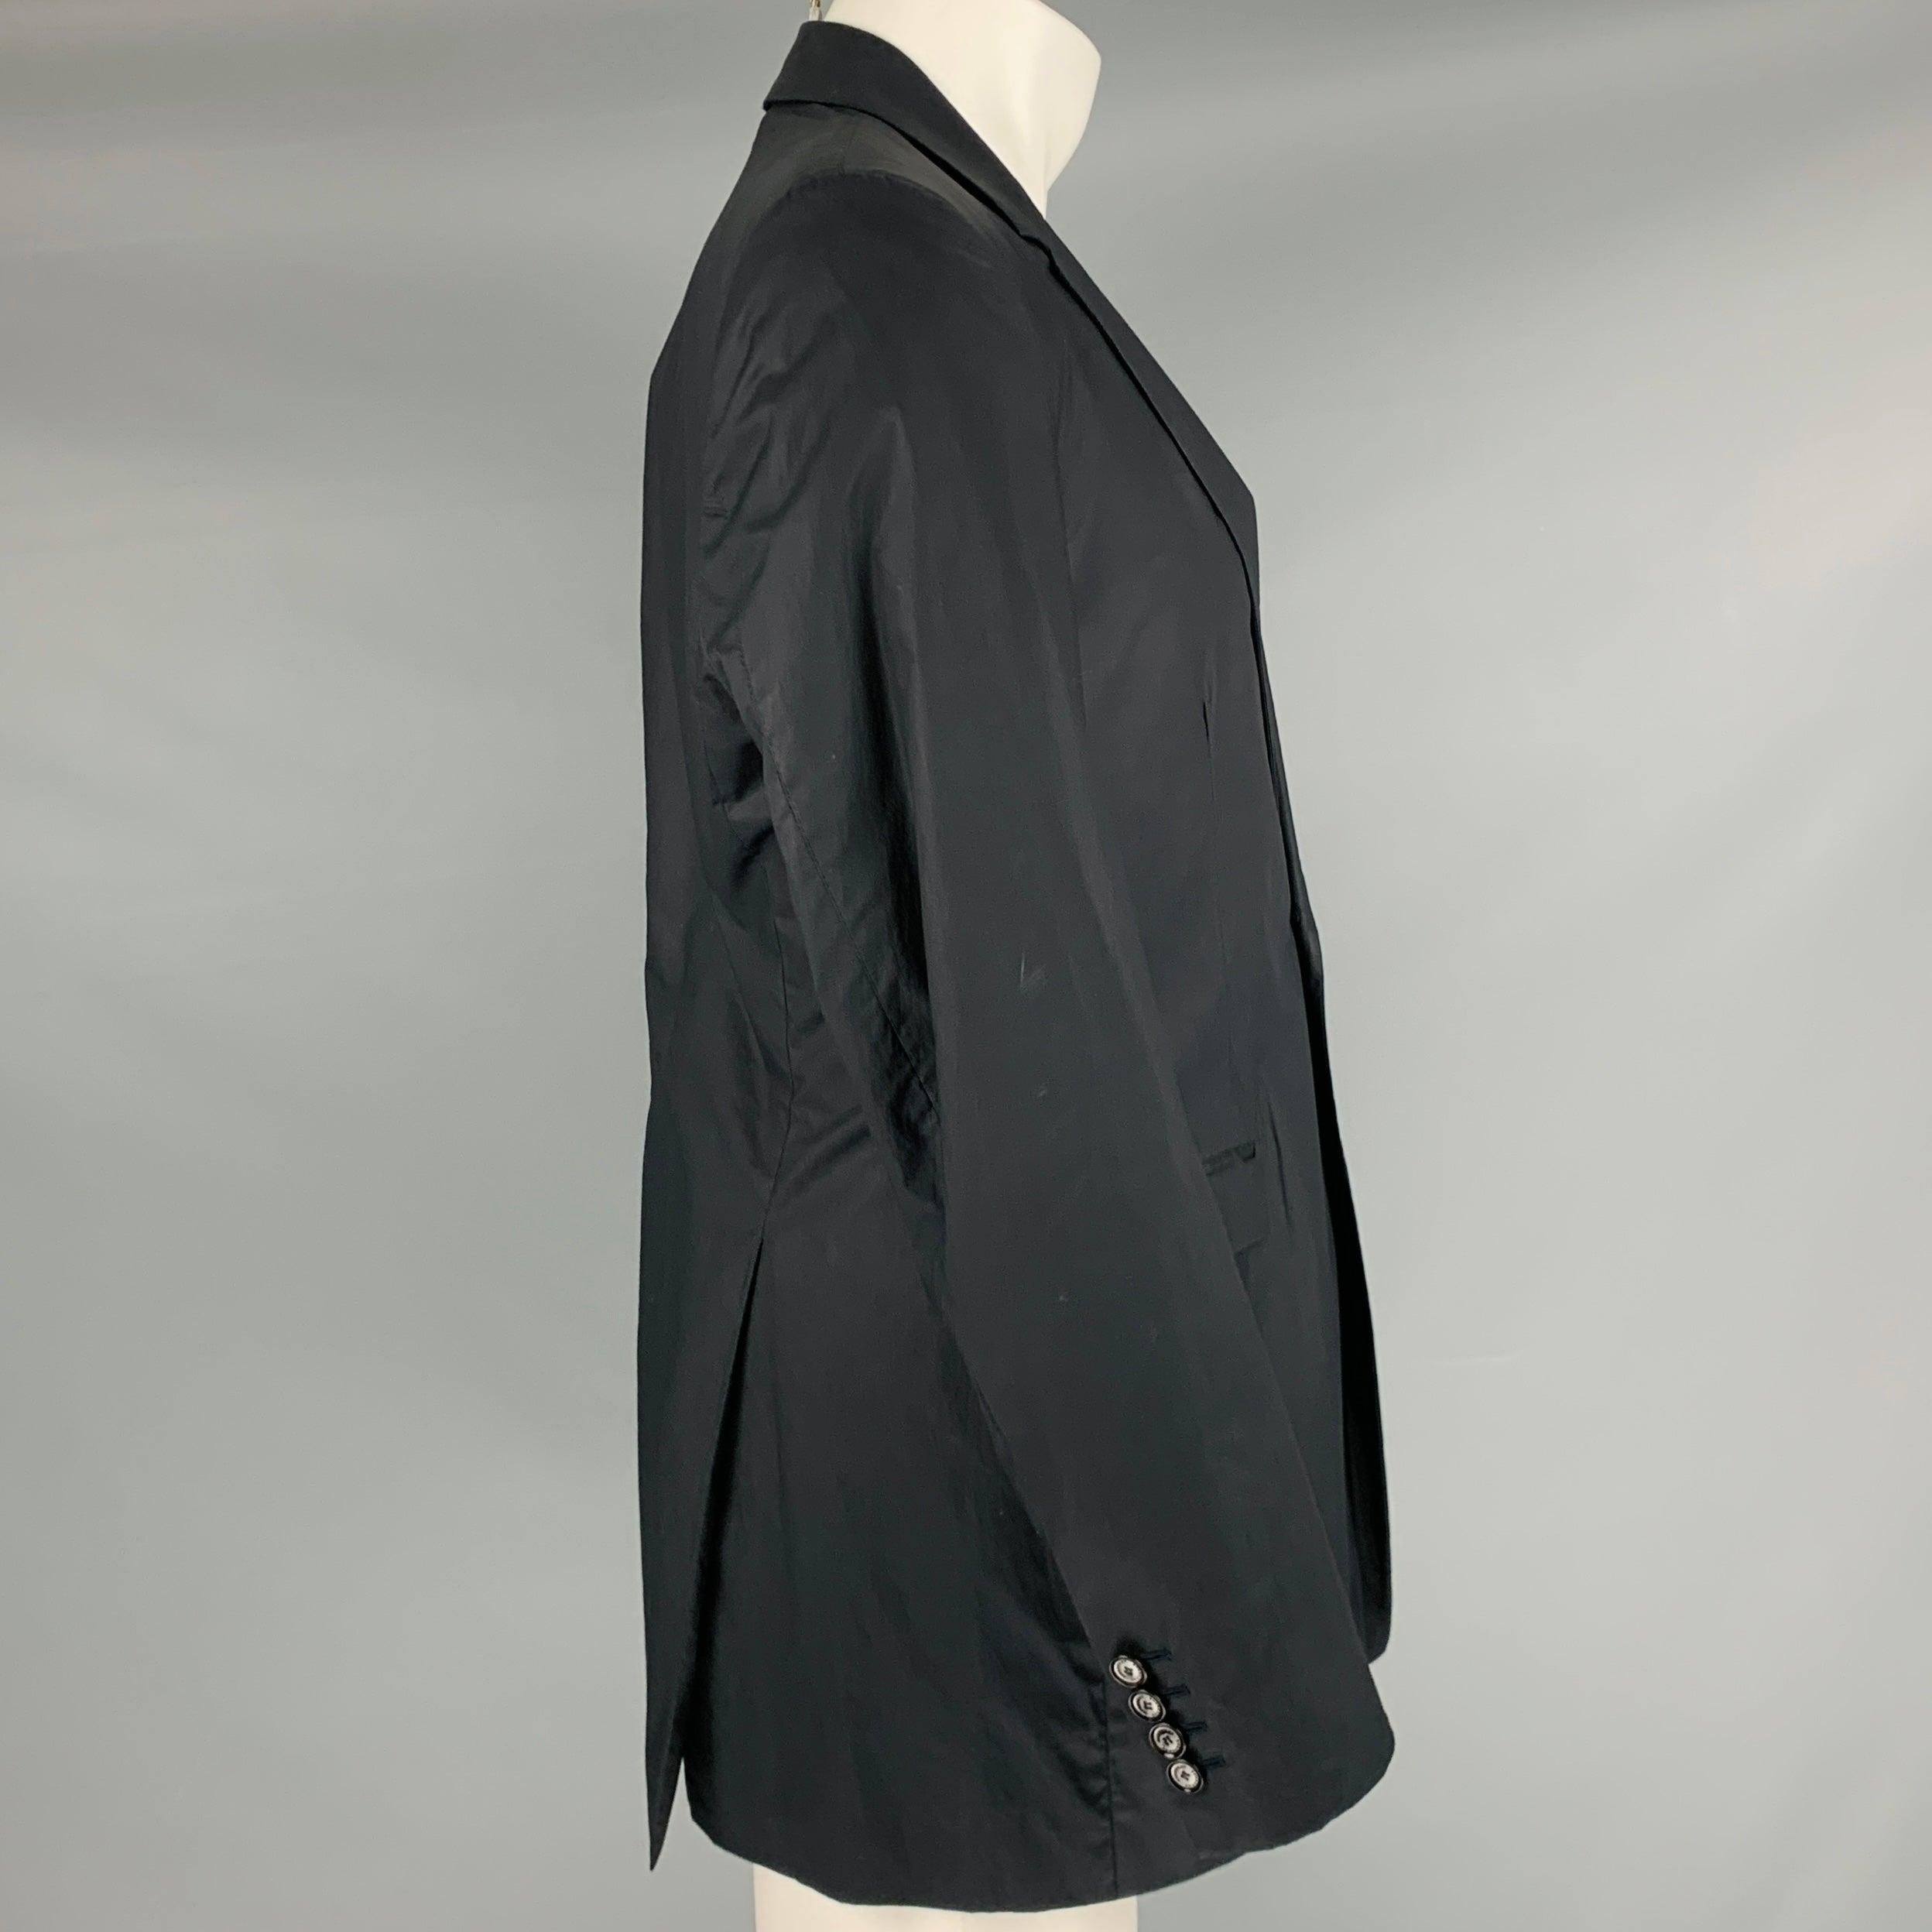 BURBERRY PRORSUM by CHRISTOPHER BAILEY sport coat
in a
black coated cotton fabric featuring notch lapel, double vented back, and double button closure.Very Good Pre-Owned Condition. Moderate marks. 

Marked:   50R 

Measurements: 
 
Shoulder: 16.5